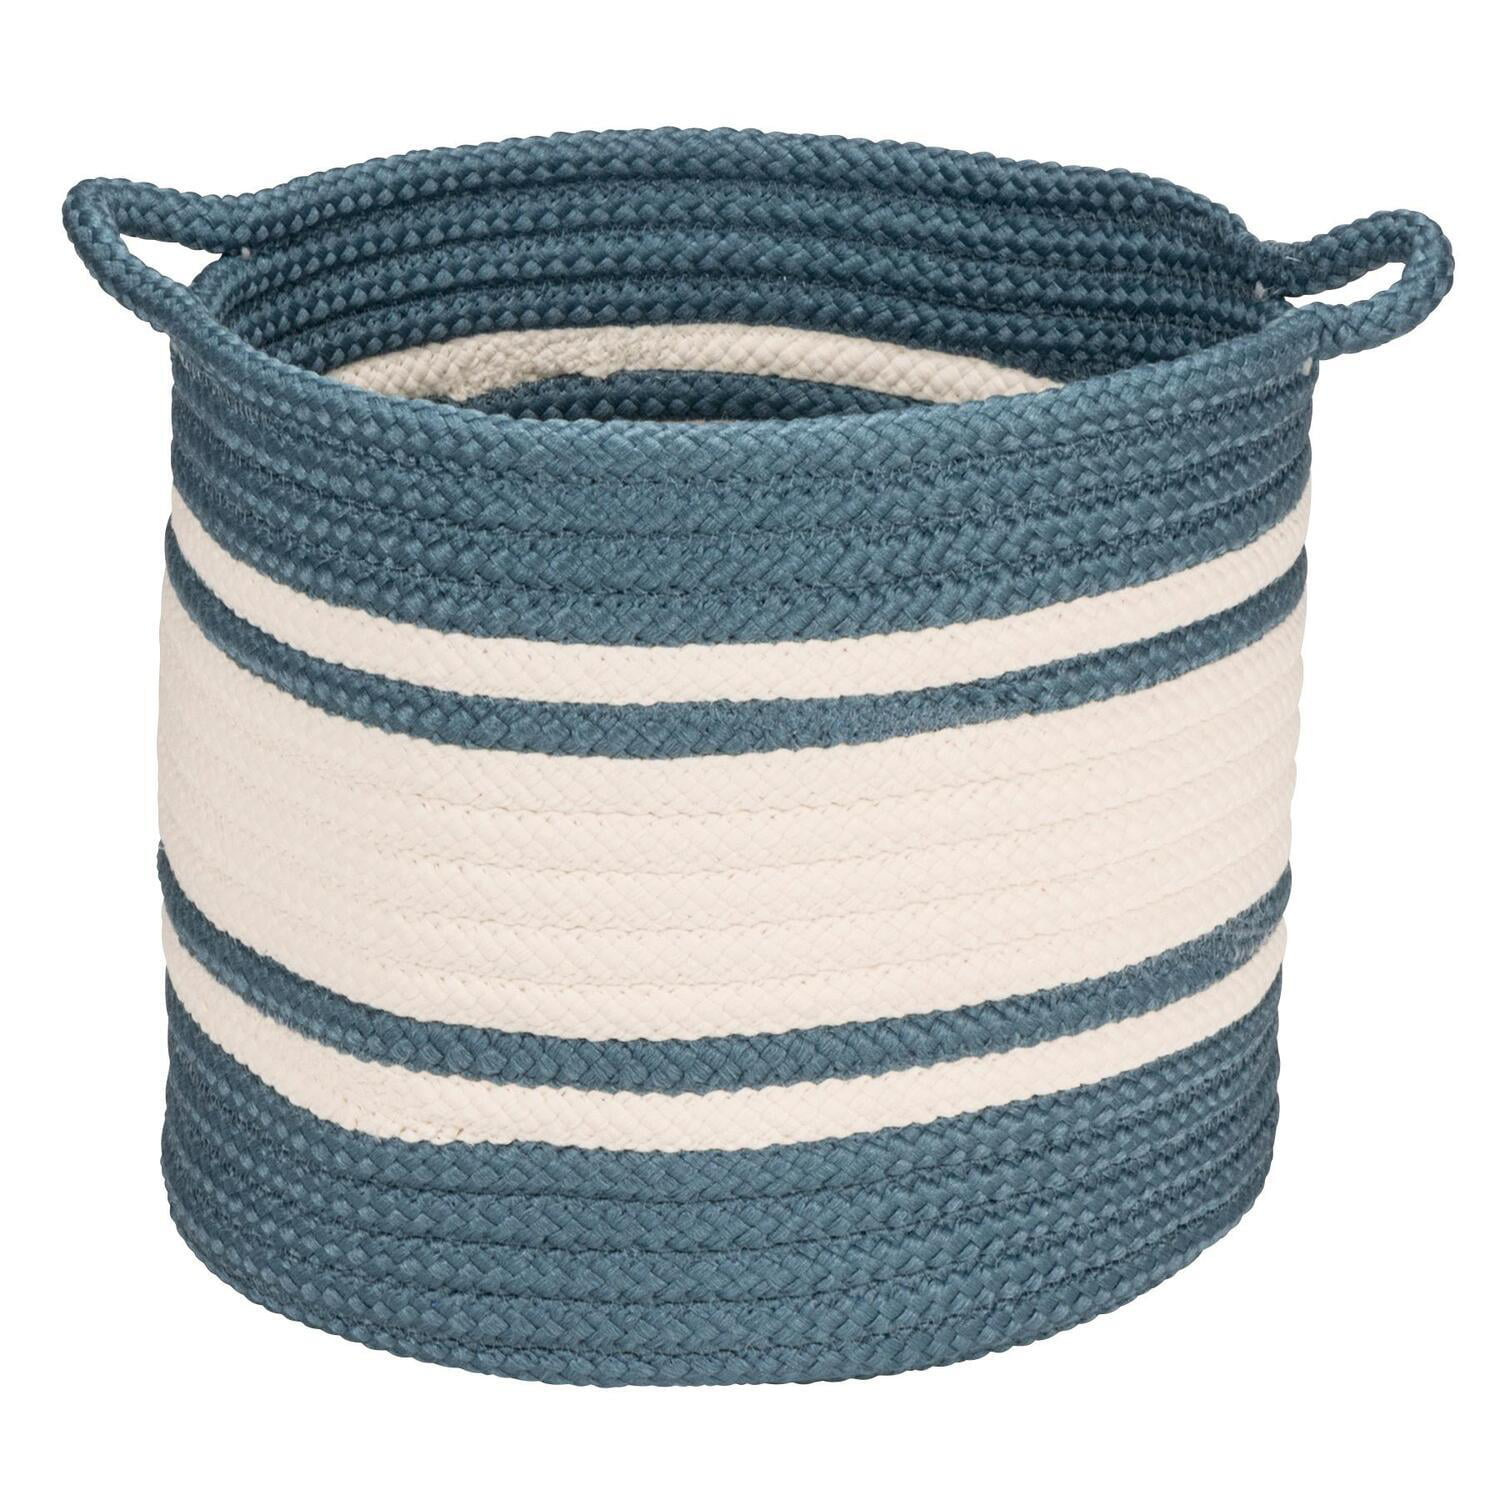 Colonia Mills Bs83 Outland Basket, Blue - 20 X 20 X 18 In.